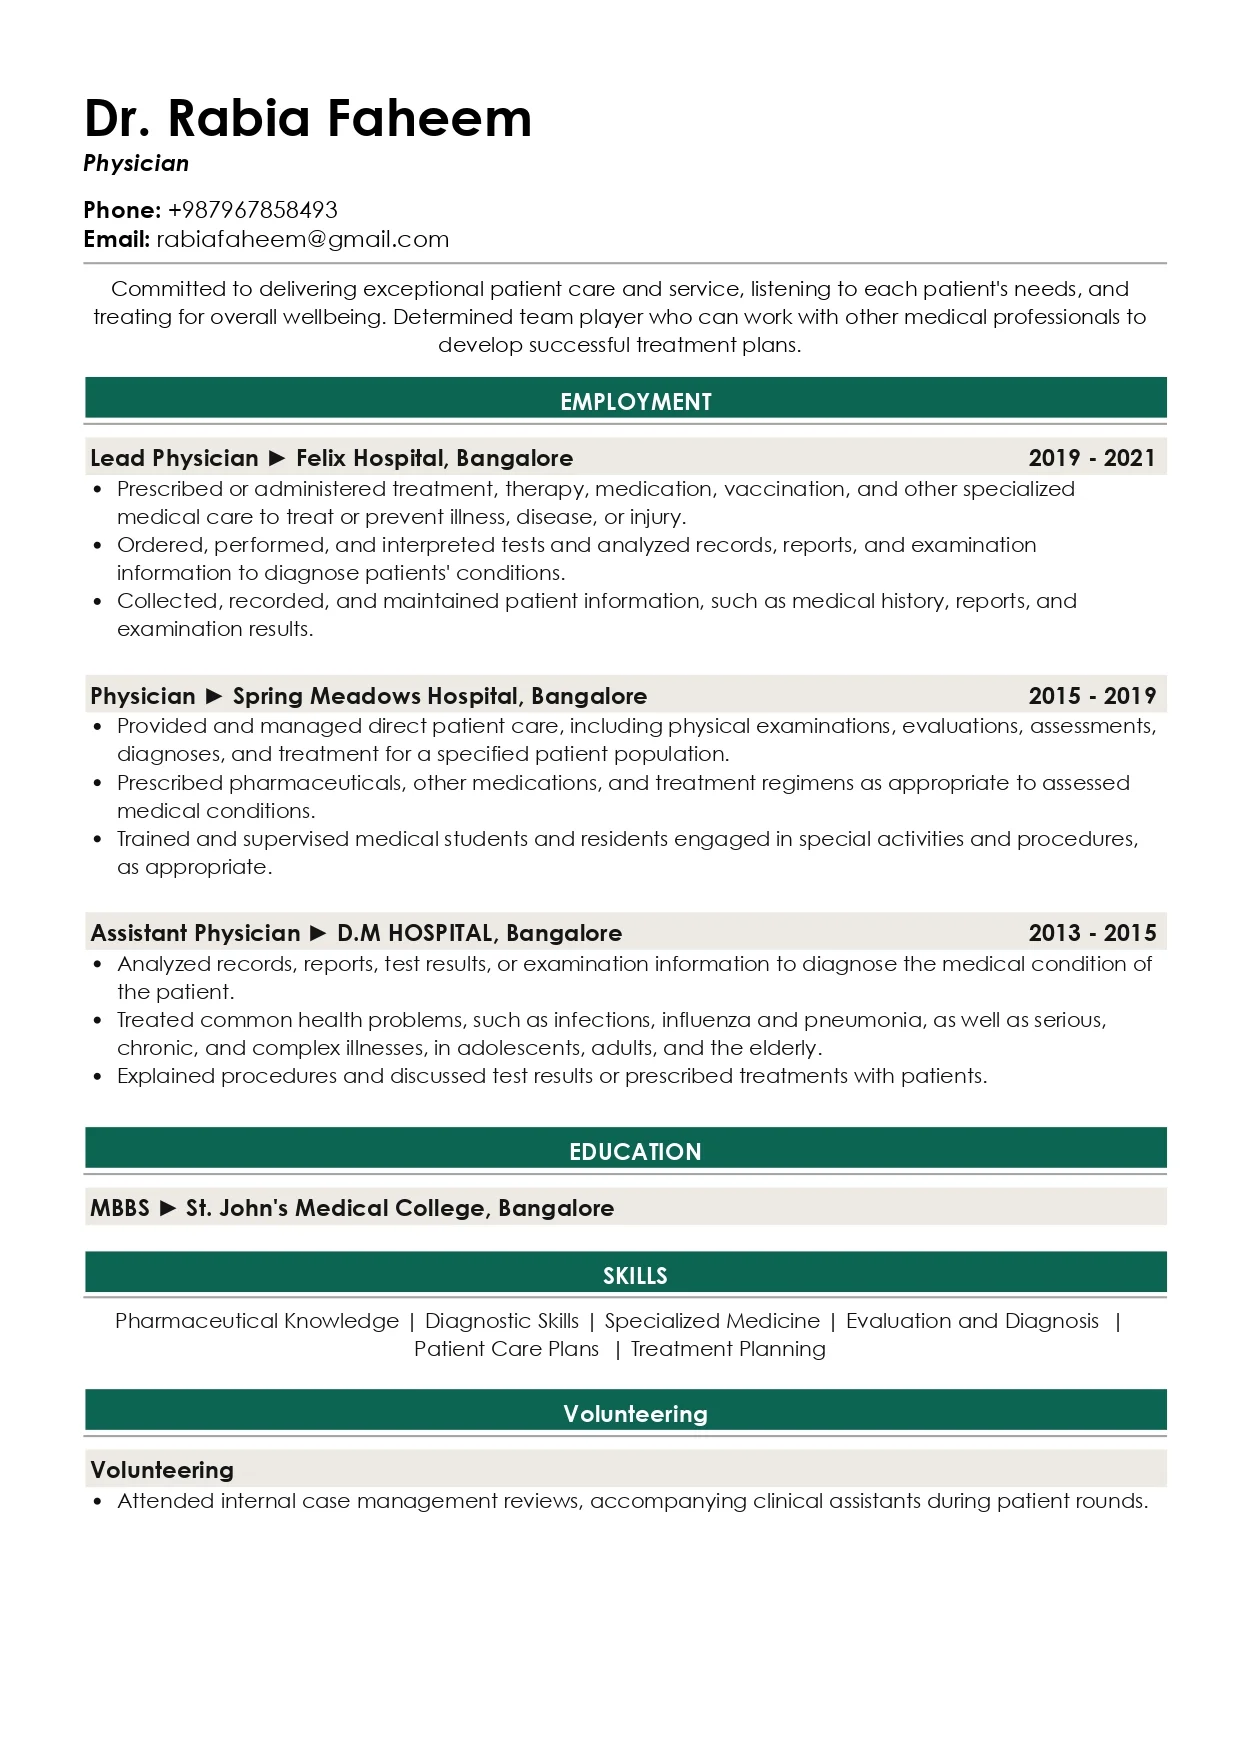 Sample Resume of Physician | Free Resume Templates & Samples on Resumod.co